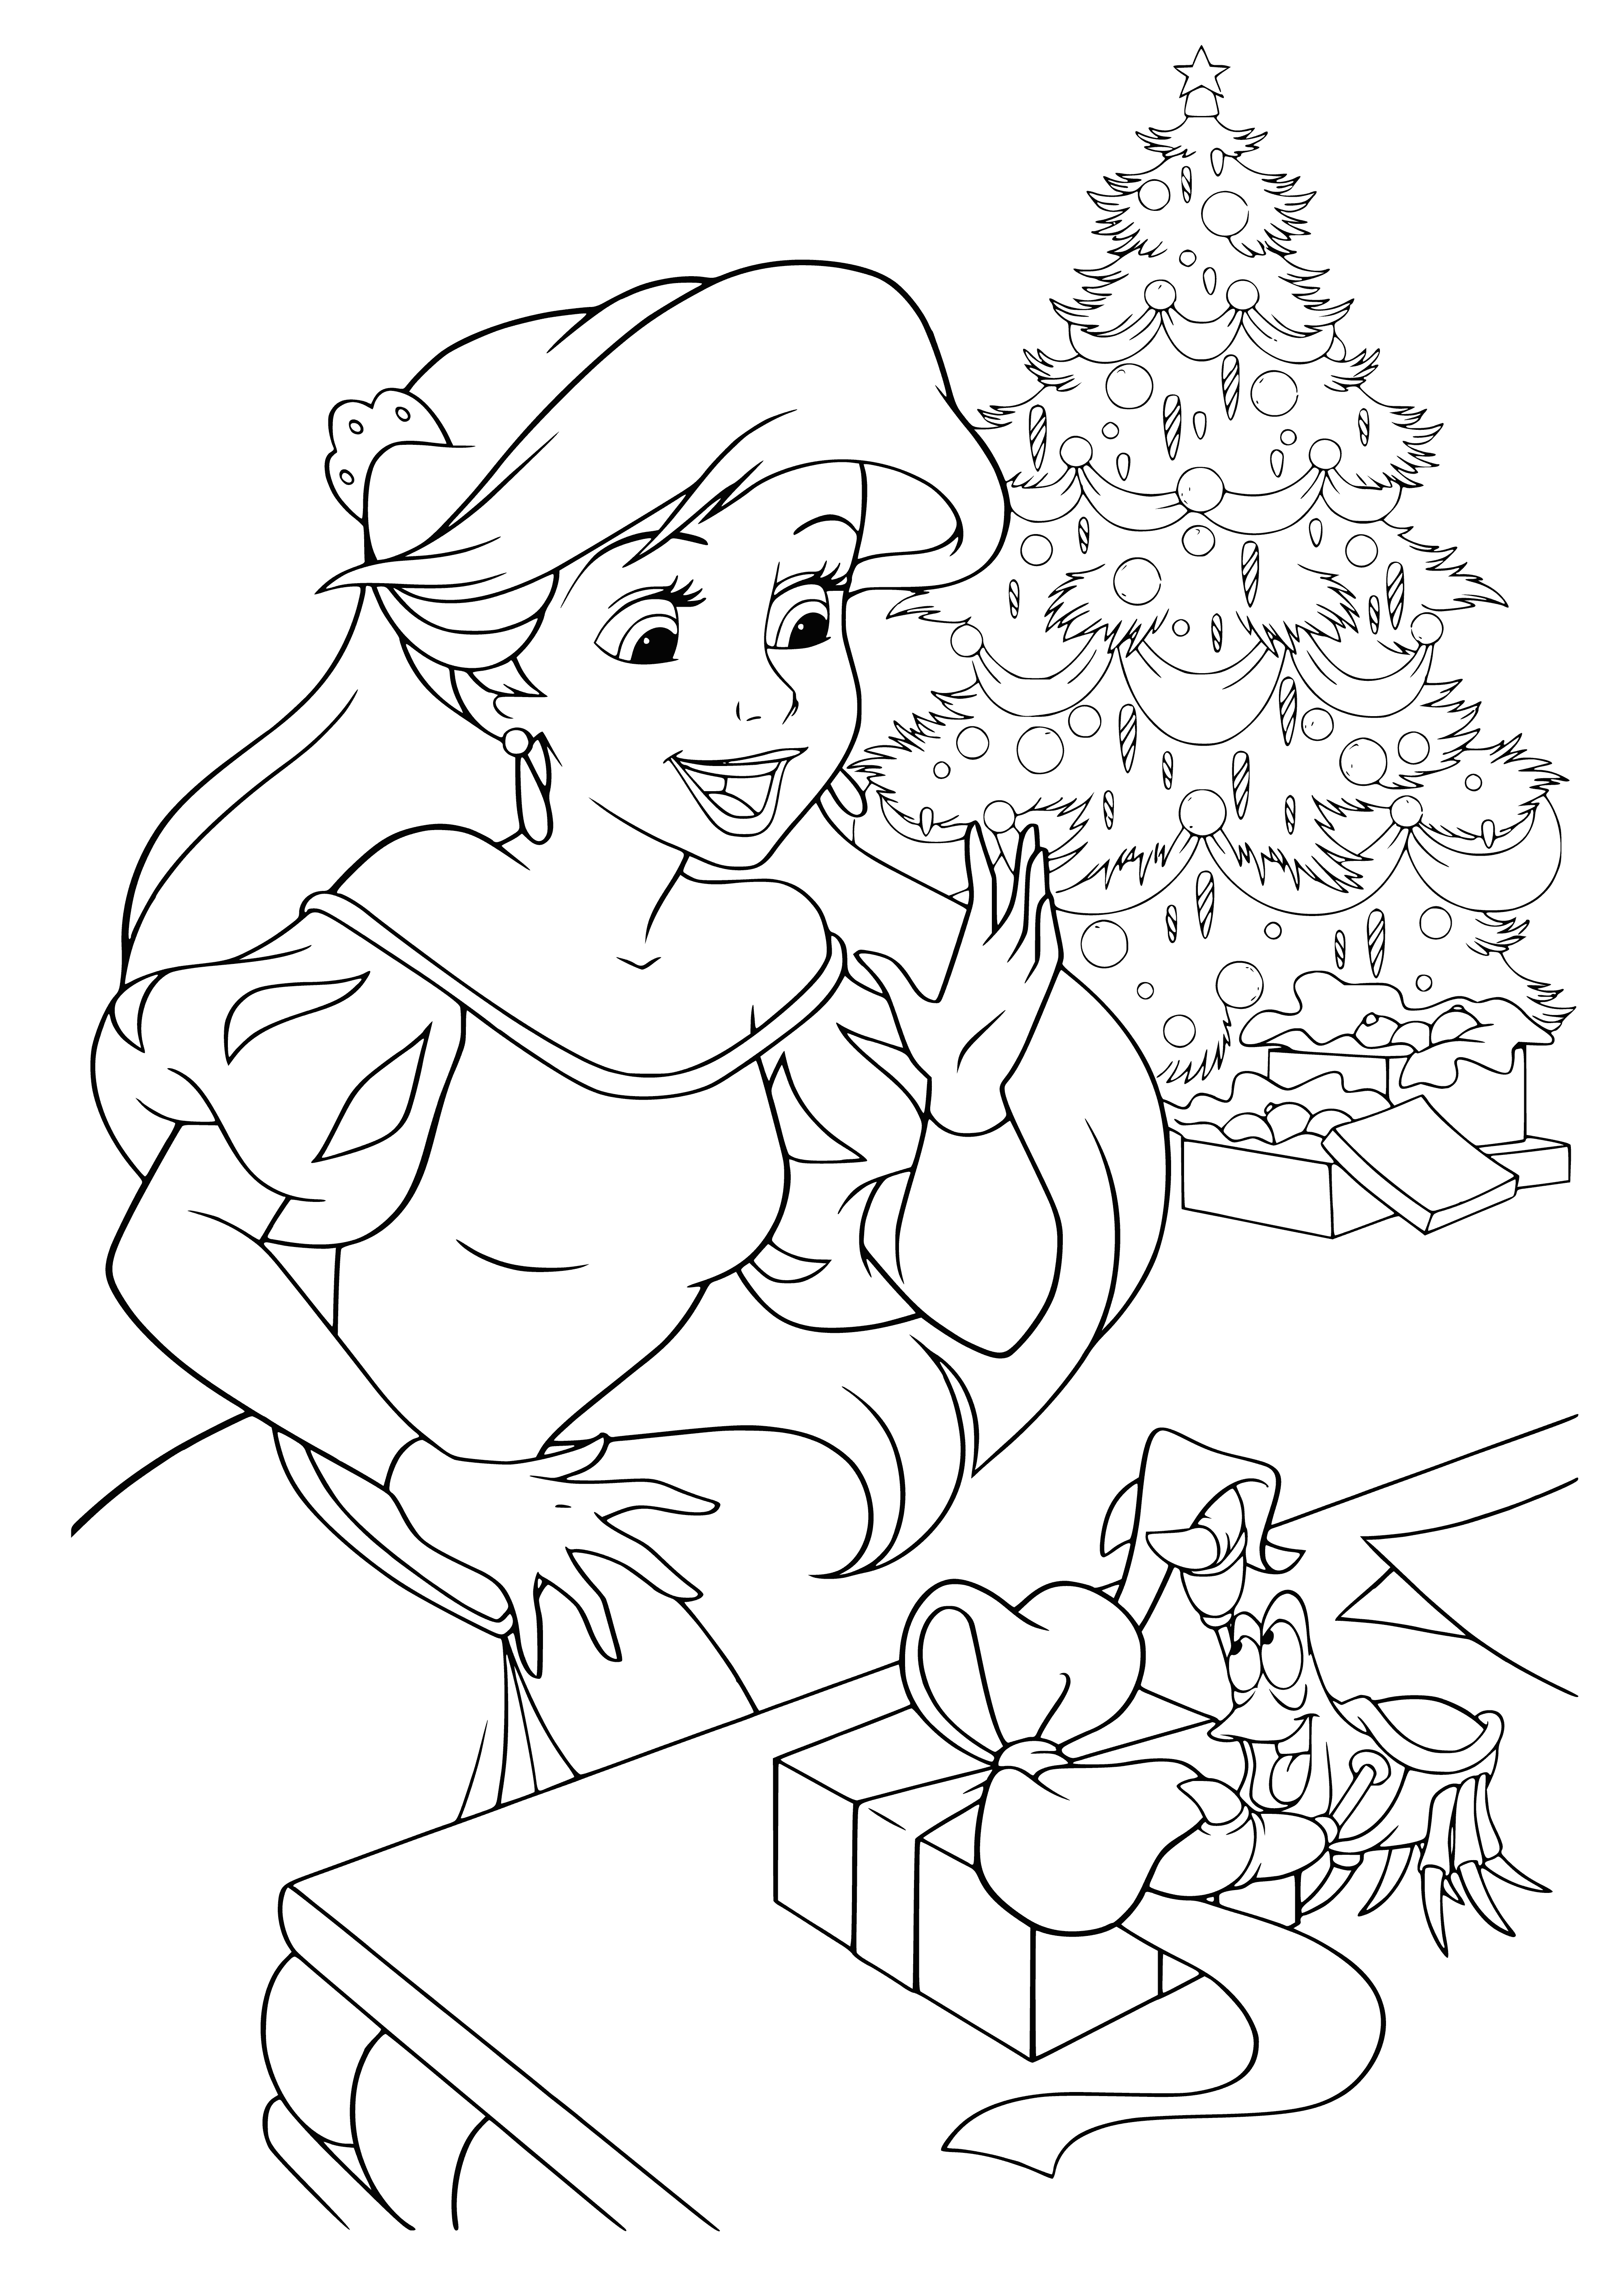 coloring page: Ariel and other Disney princesses celebrate New Year, Ariel with a new outfit holding a gift, a seashell with message: "Have a happy and prosperous New Year!"